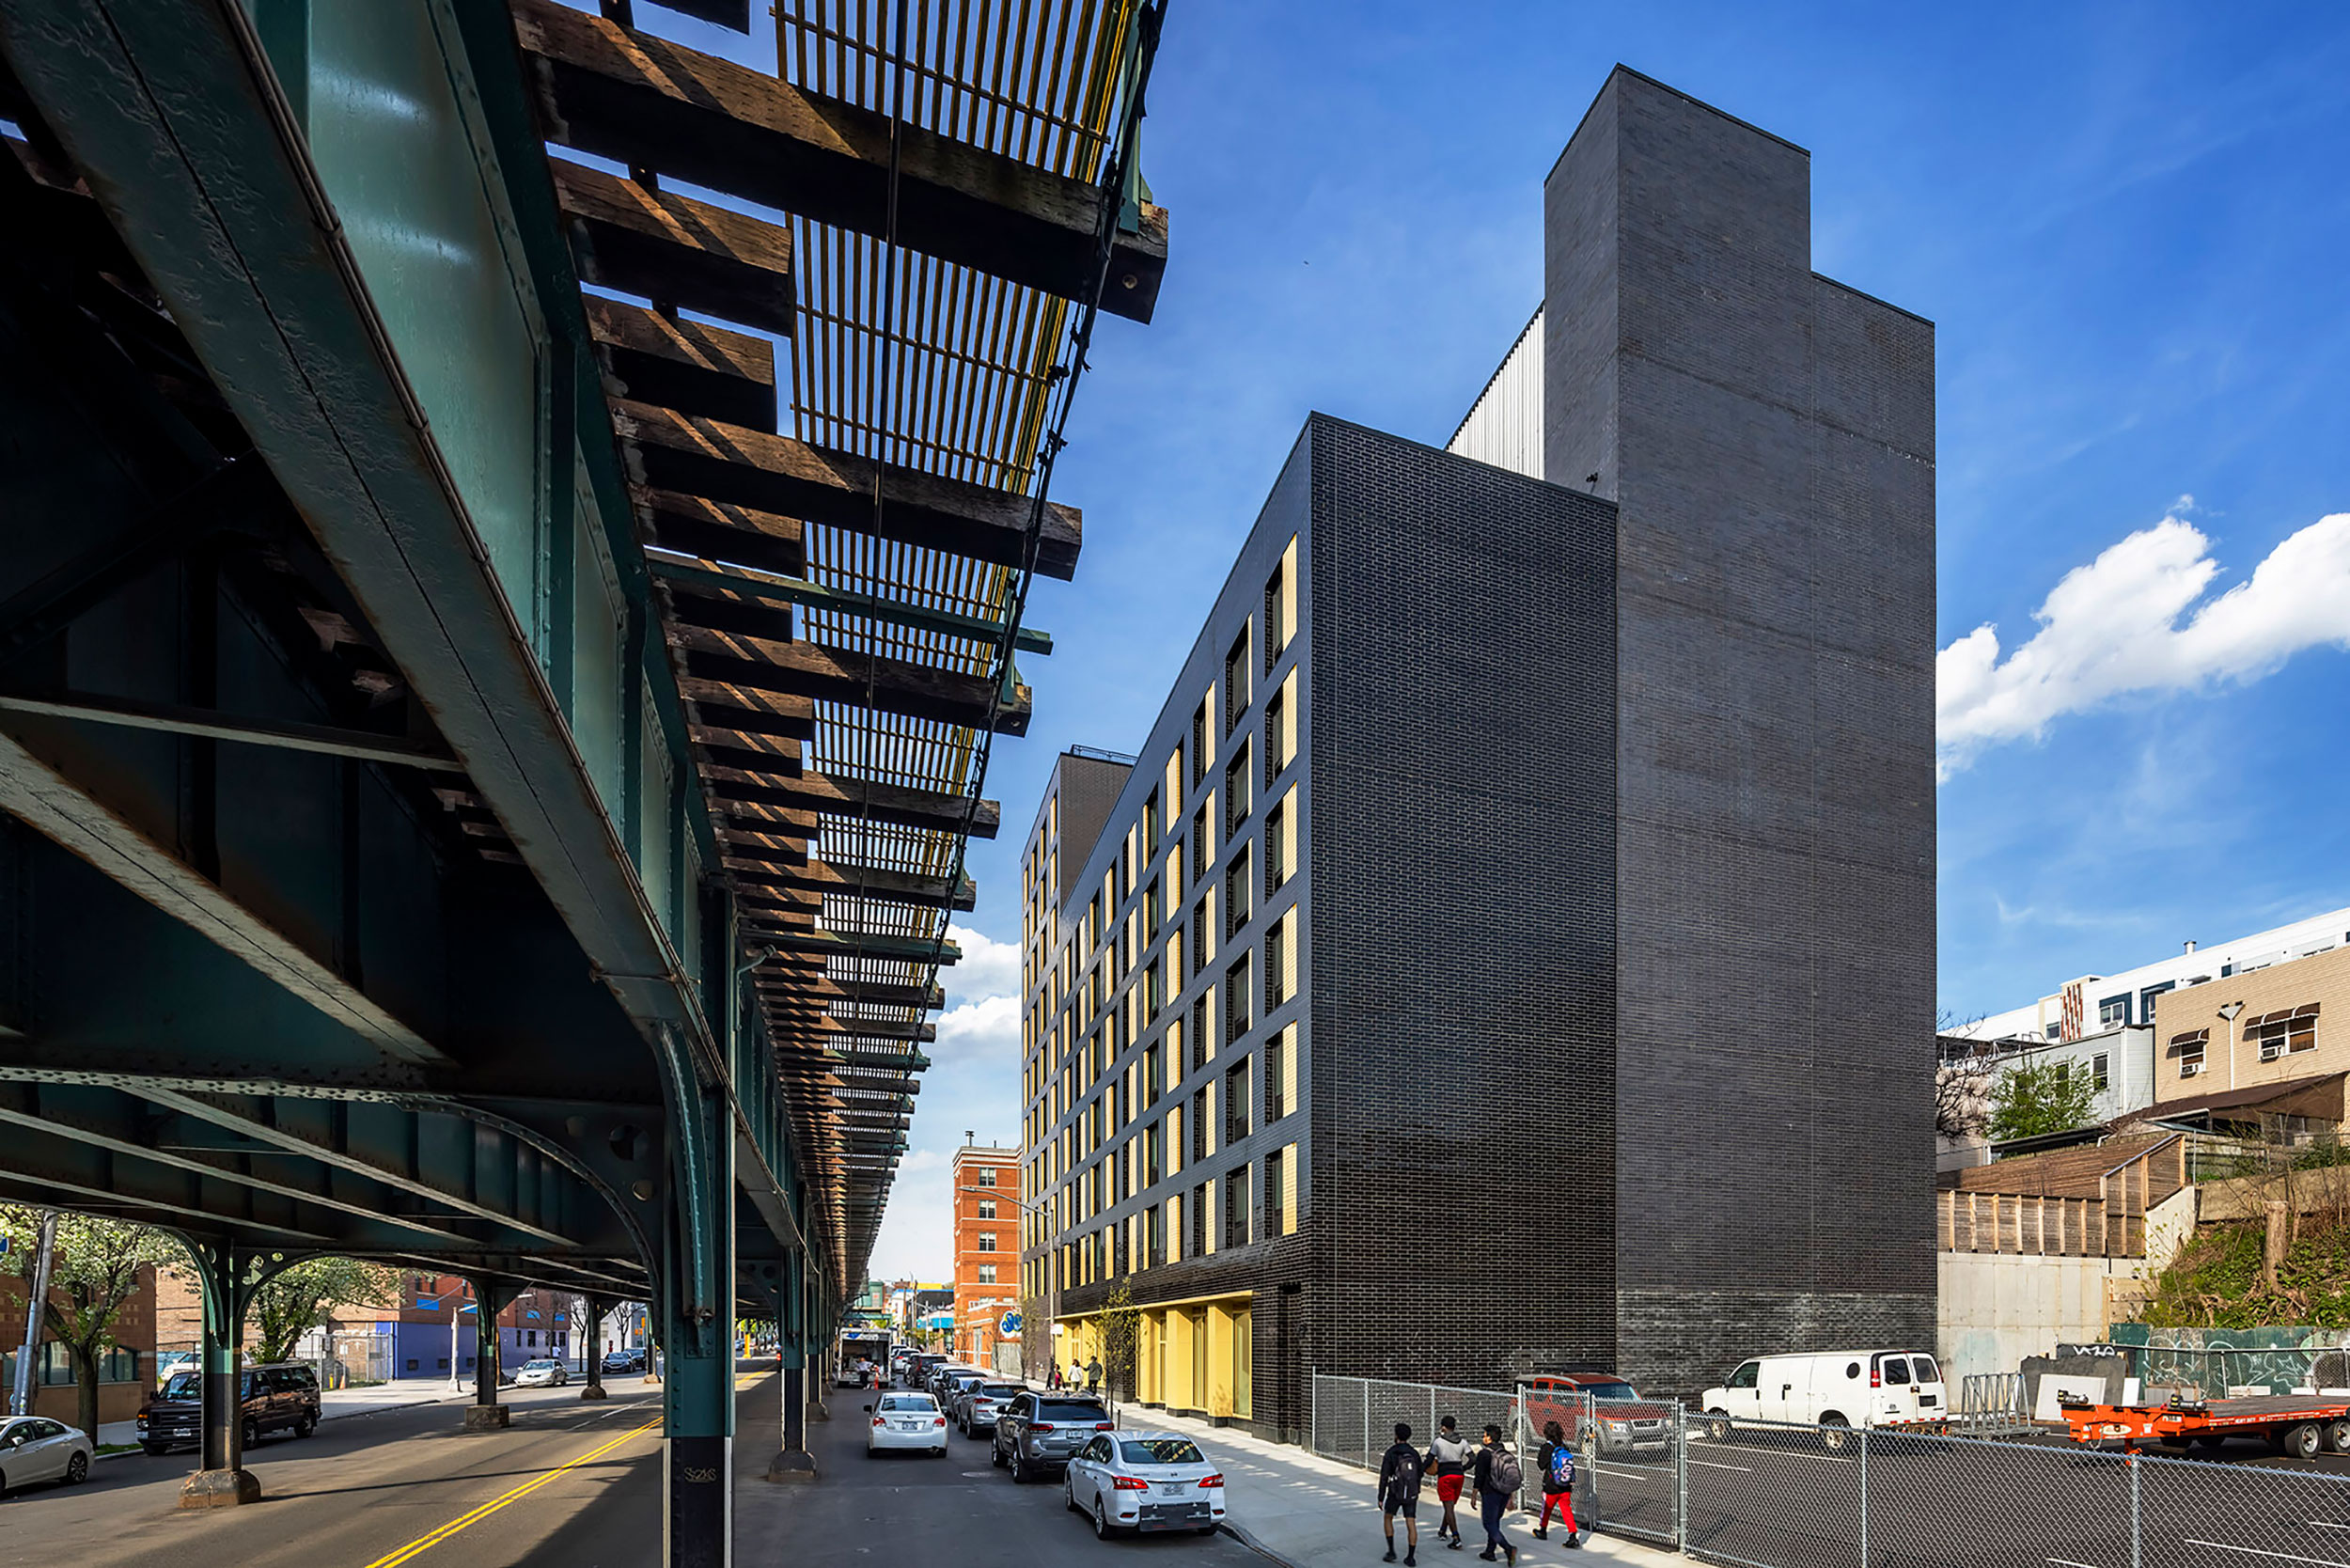 1490 Southern Boulevard in Bronx, NY, by Bernheimer Architecture